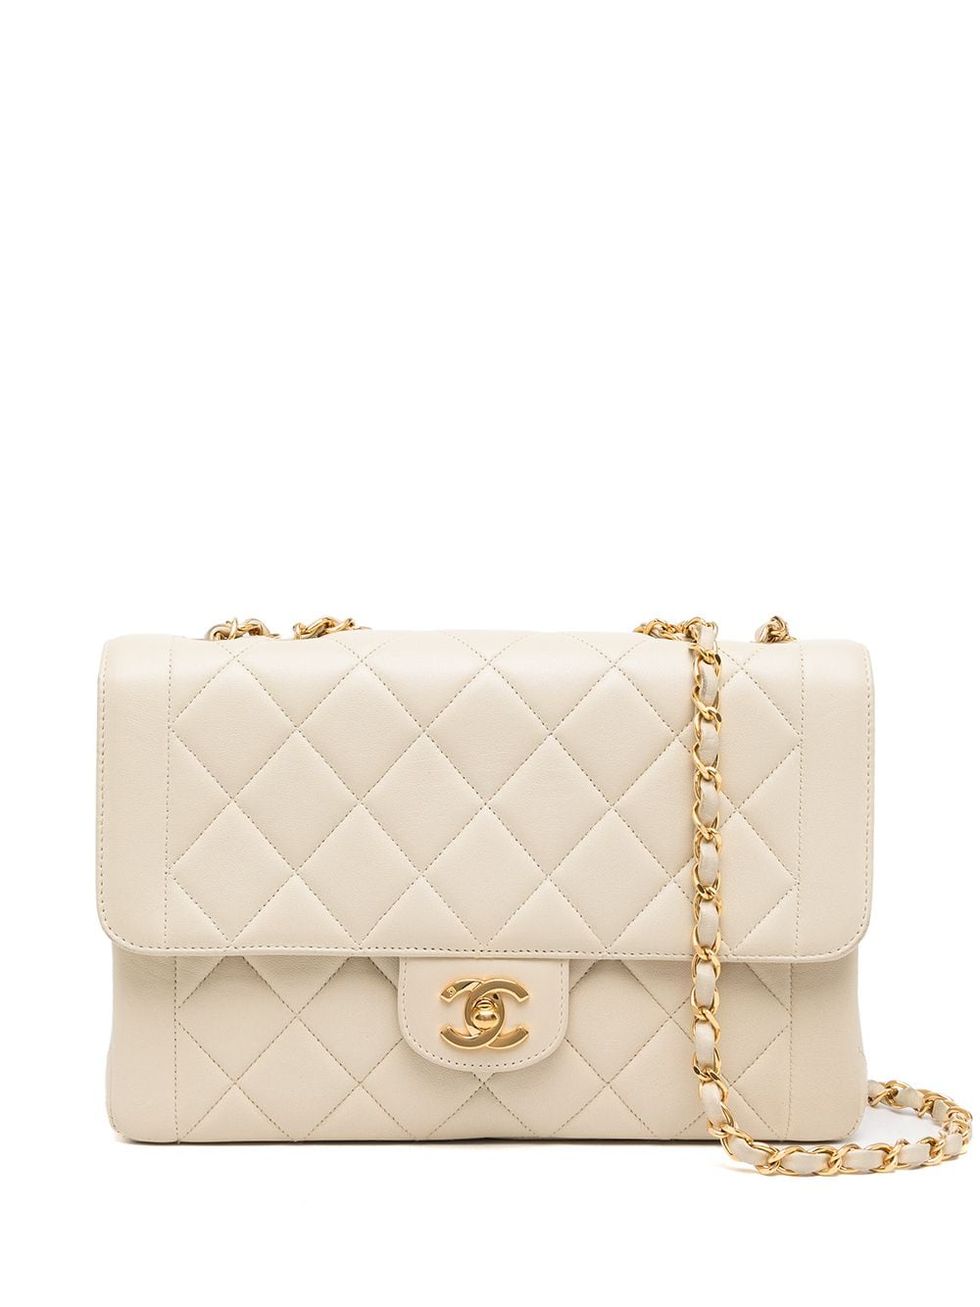 chanel bags on sale